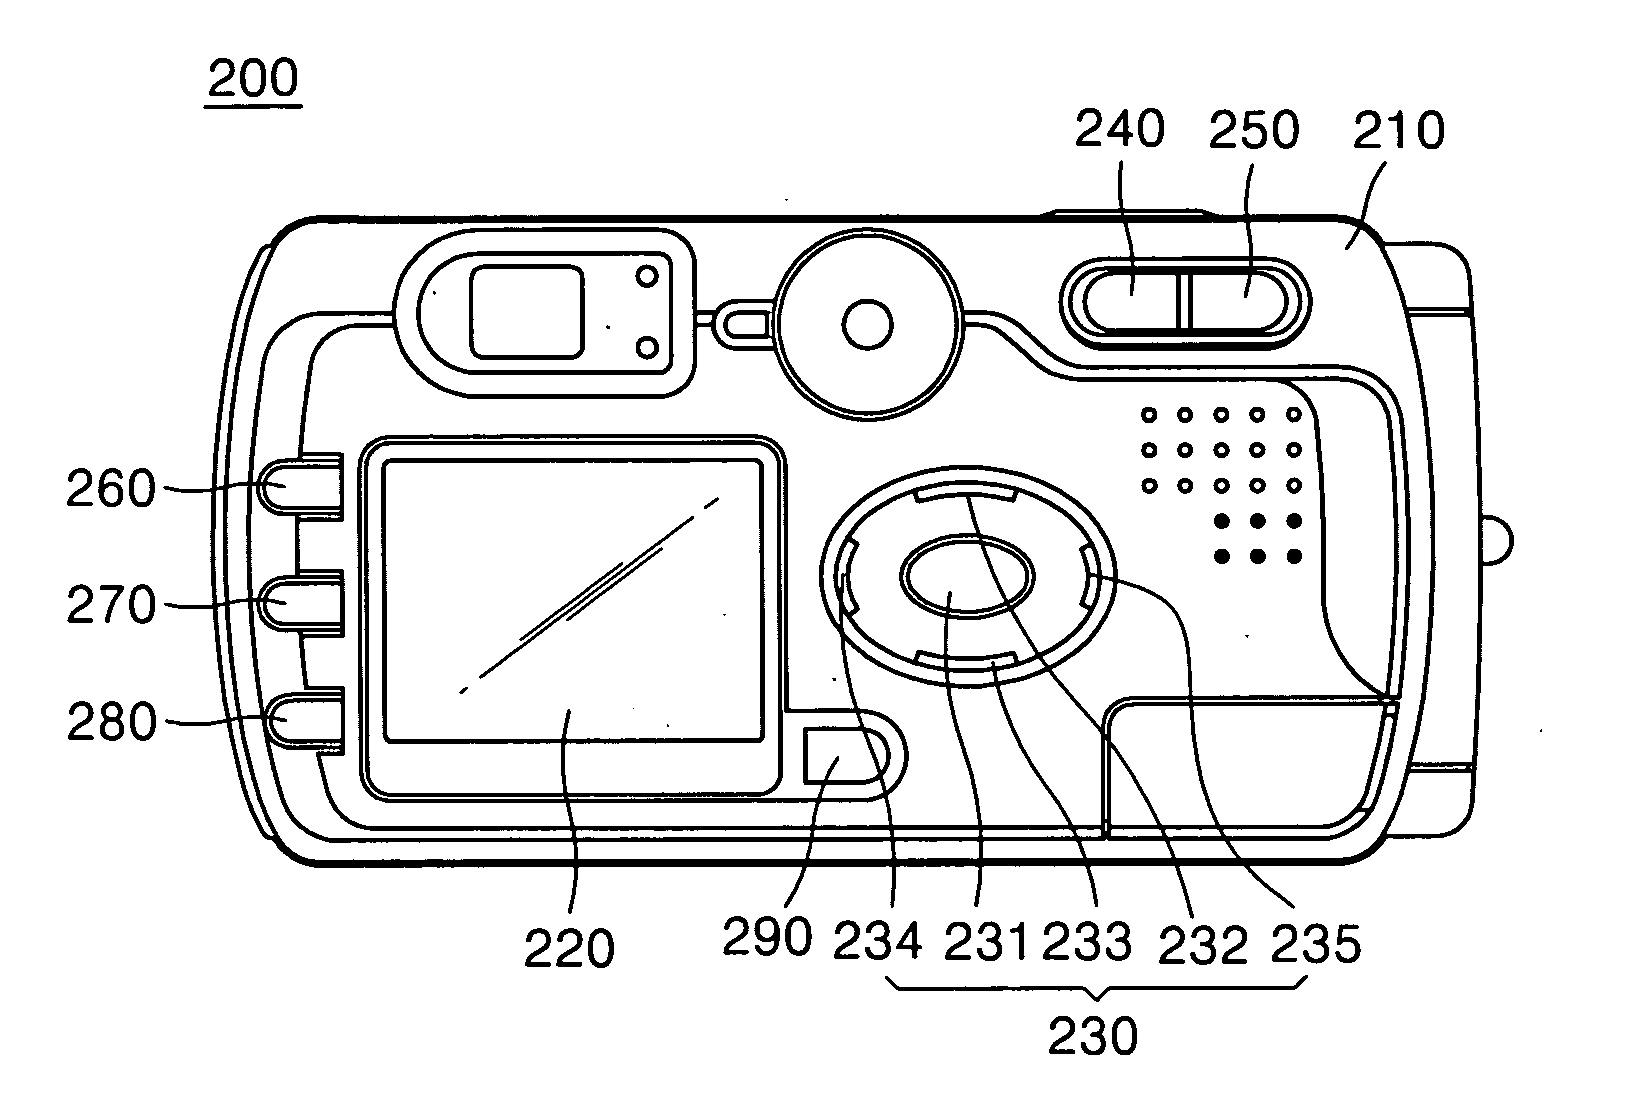 Method of inputting information into a mobile digital device